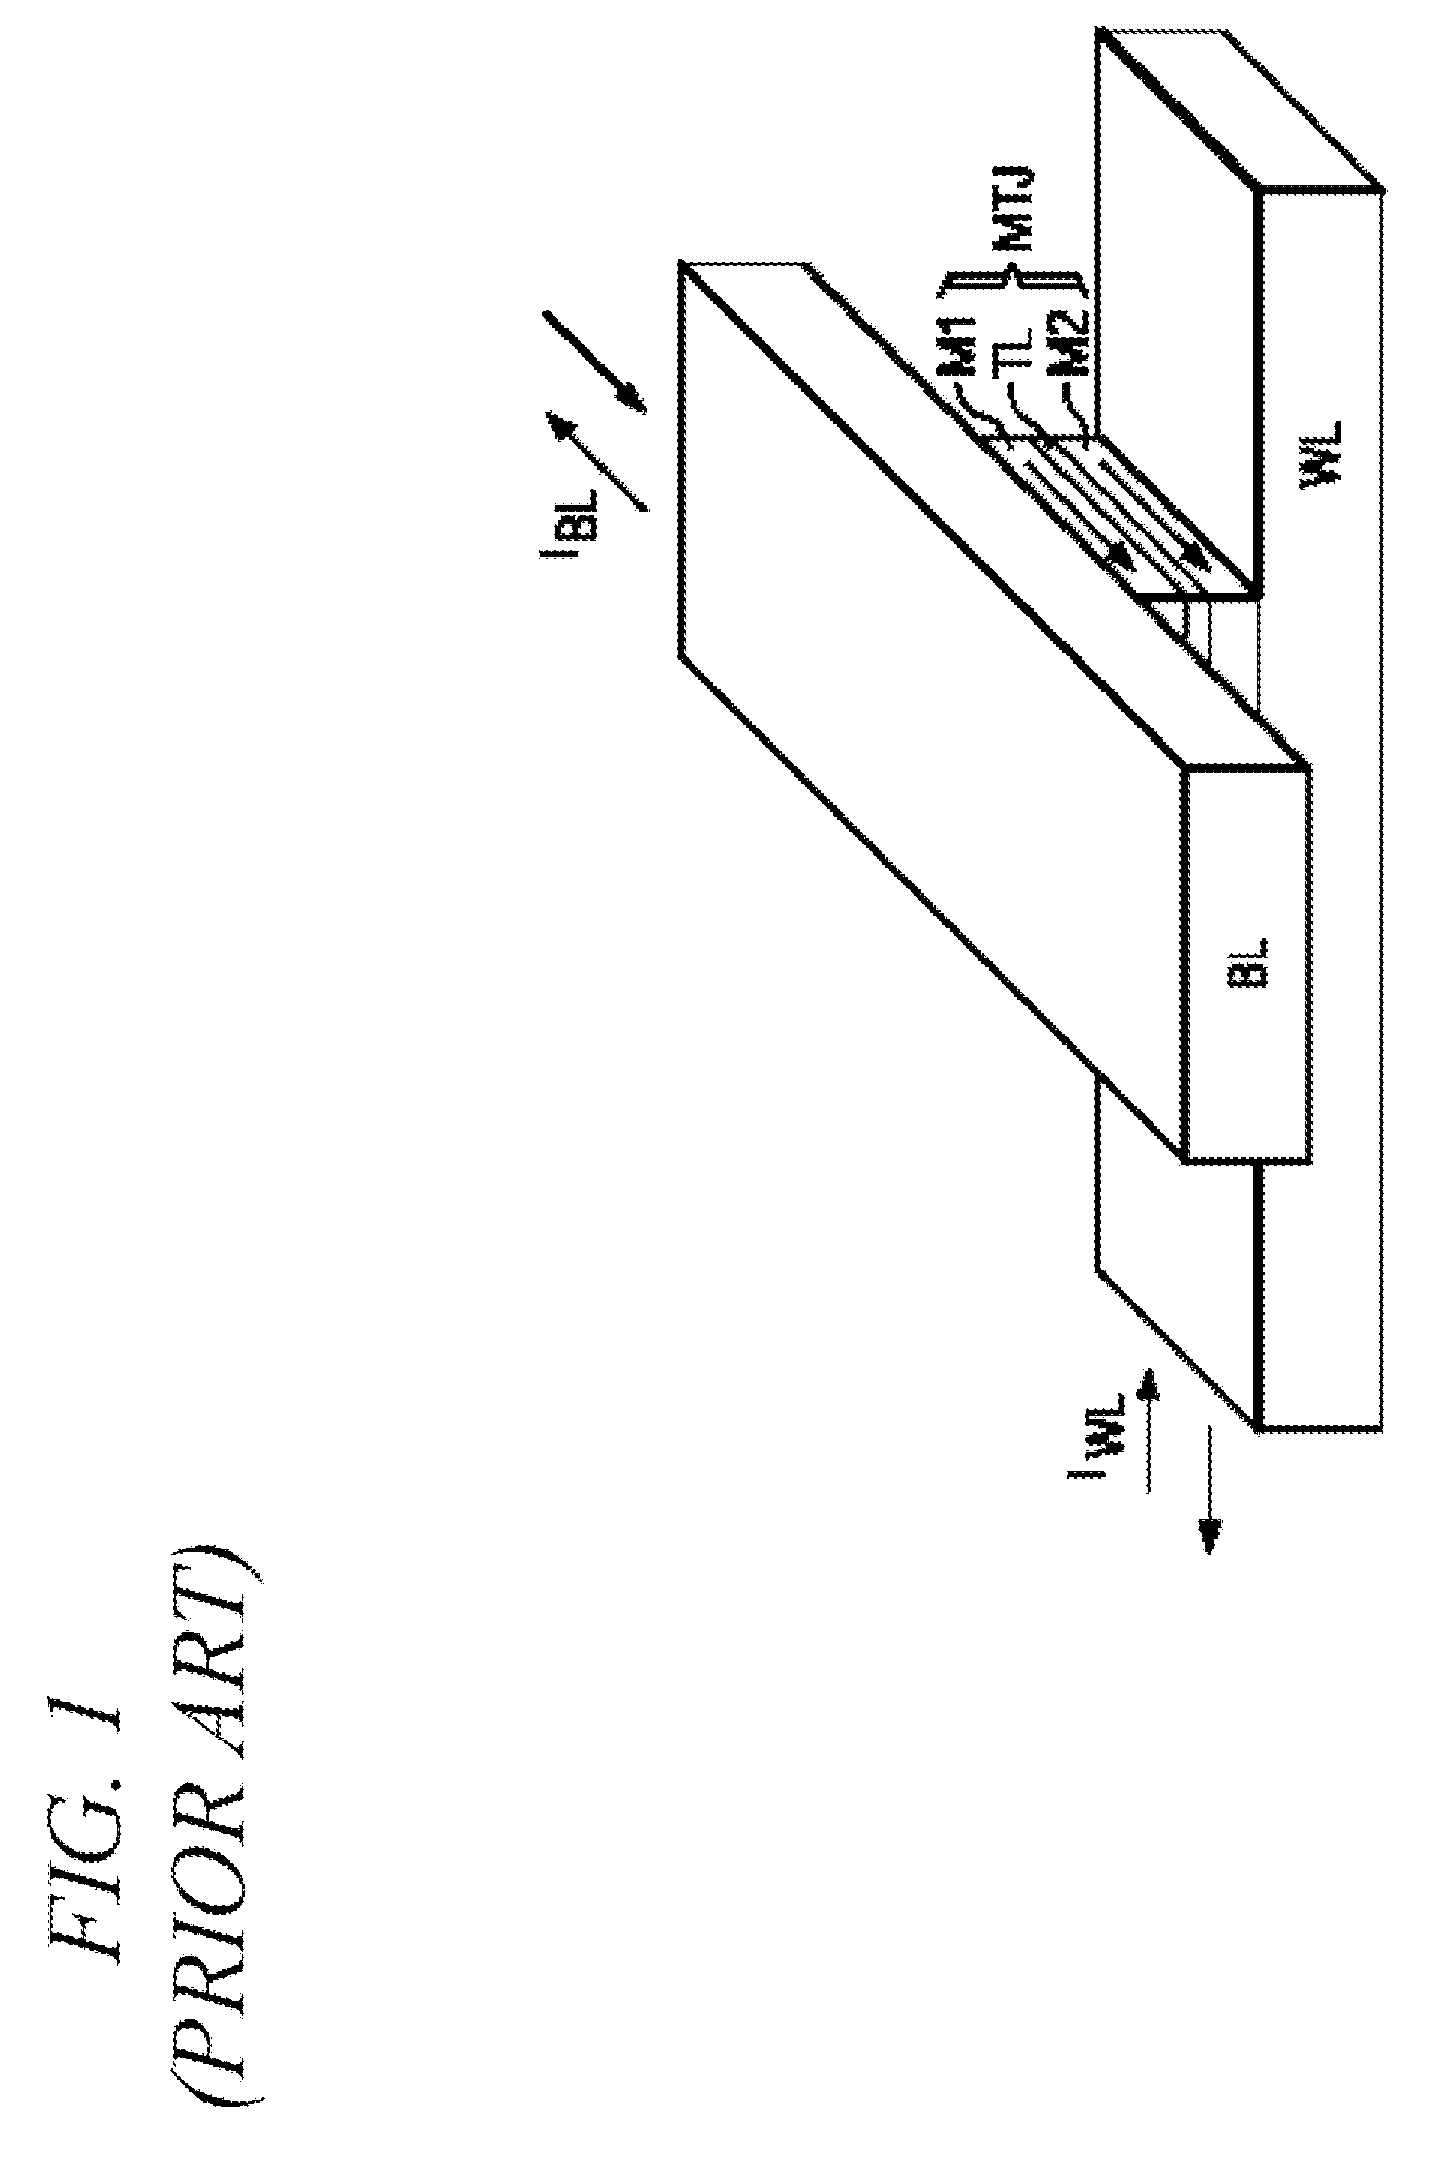 Integrated Circuit, Method of Operating an Integrated Circuit, Method of Manufacturing an Integrated Circuit, Memory Module, Stackable Memory Module